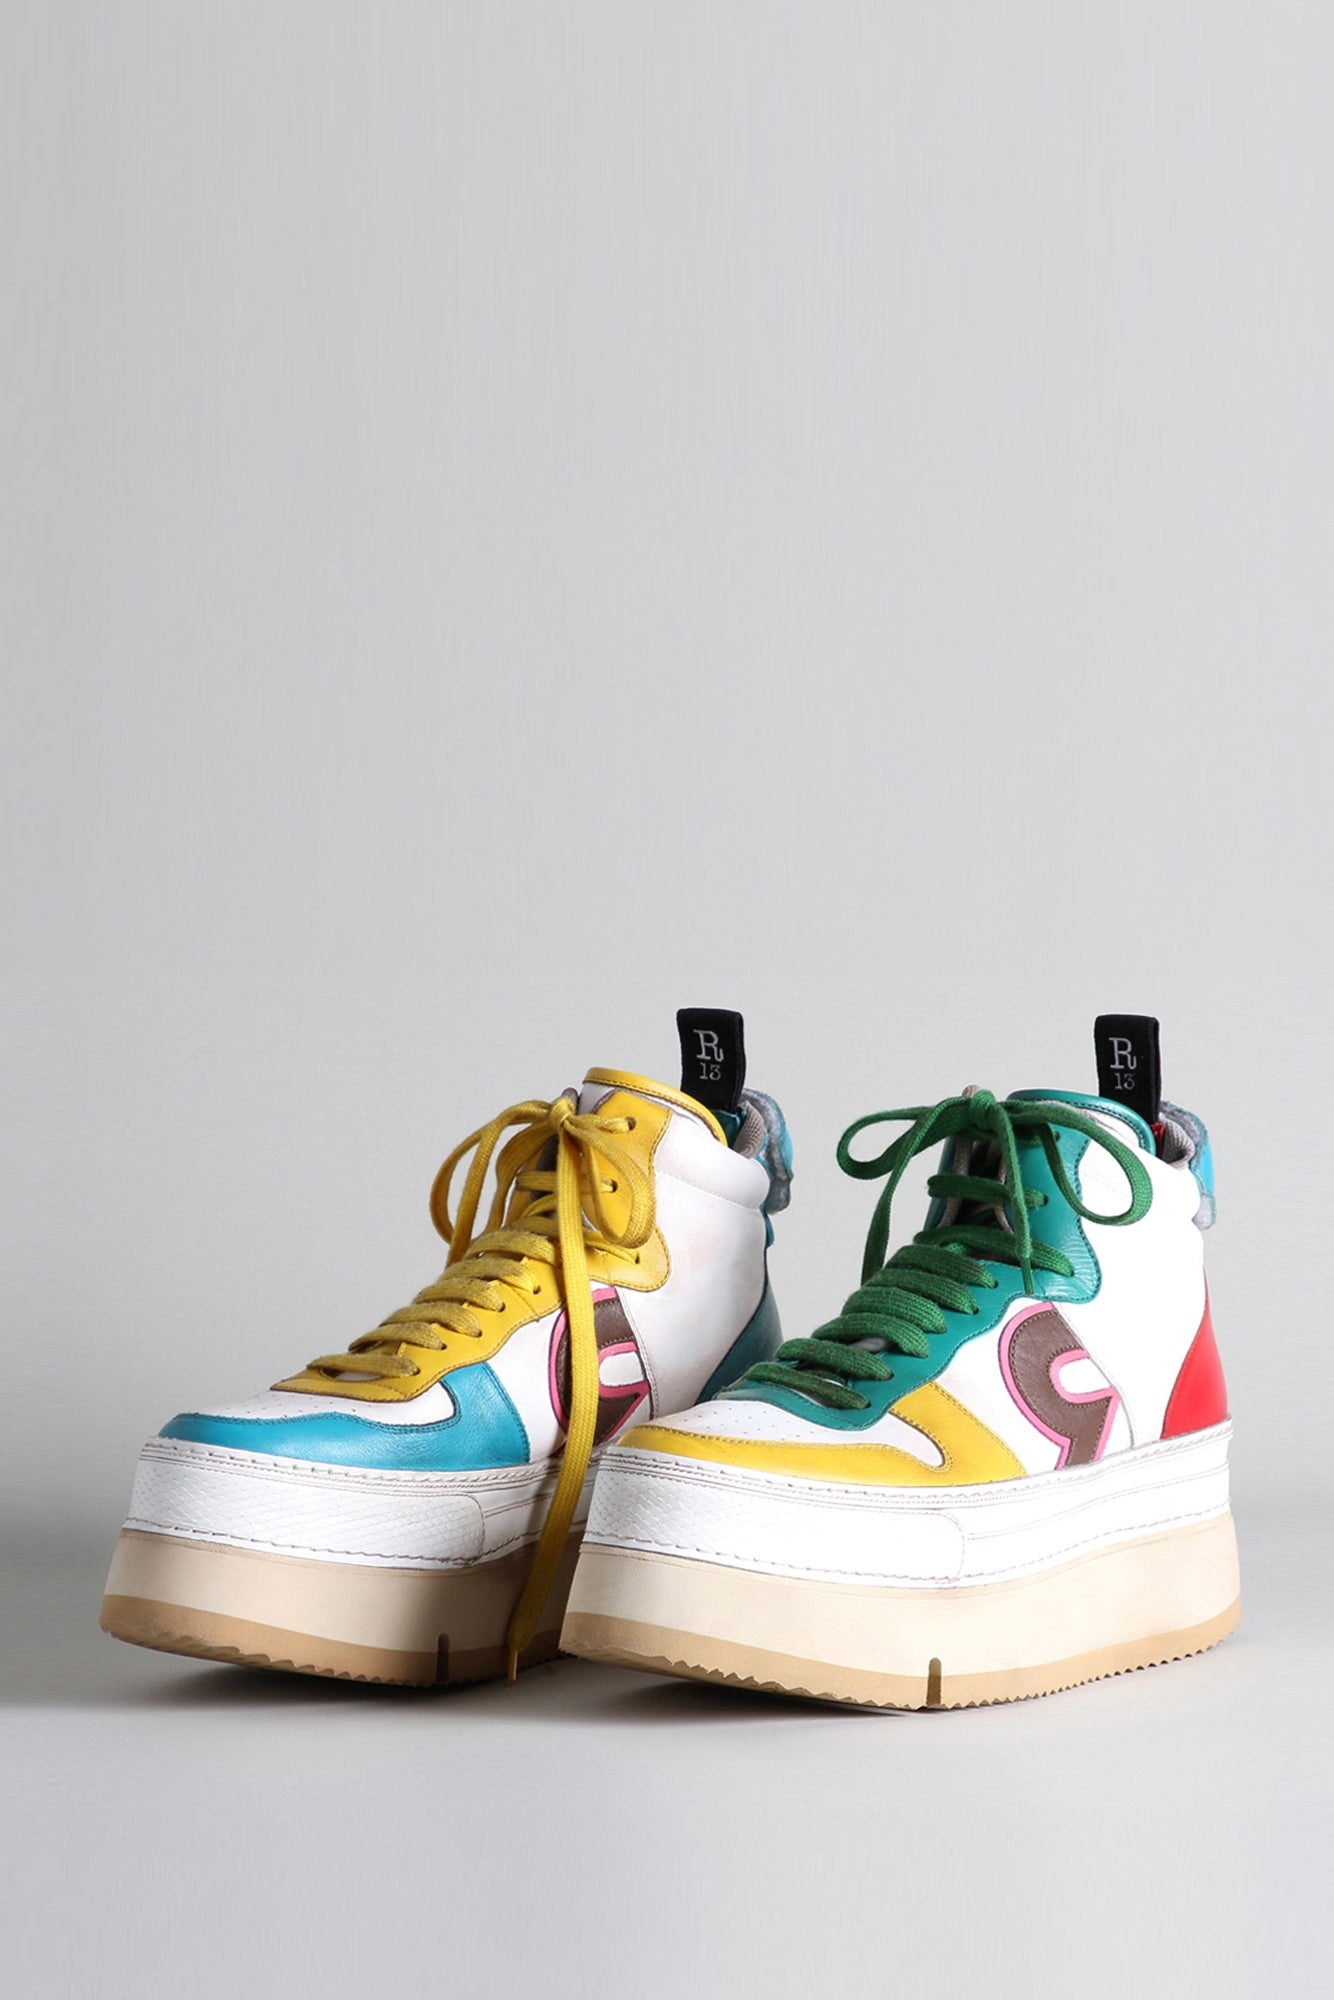 The Riot Leather High Top - Multicolor | R13 Denim Official Site - 1